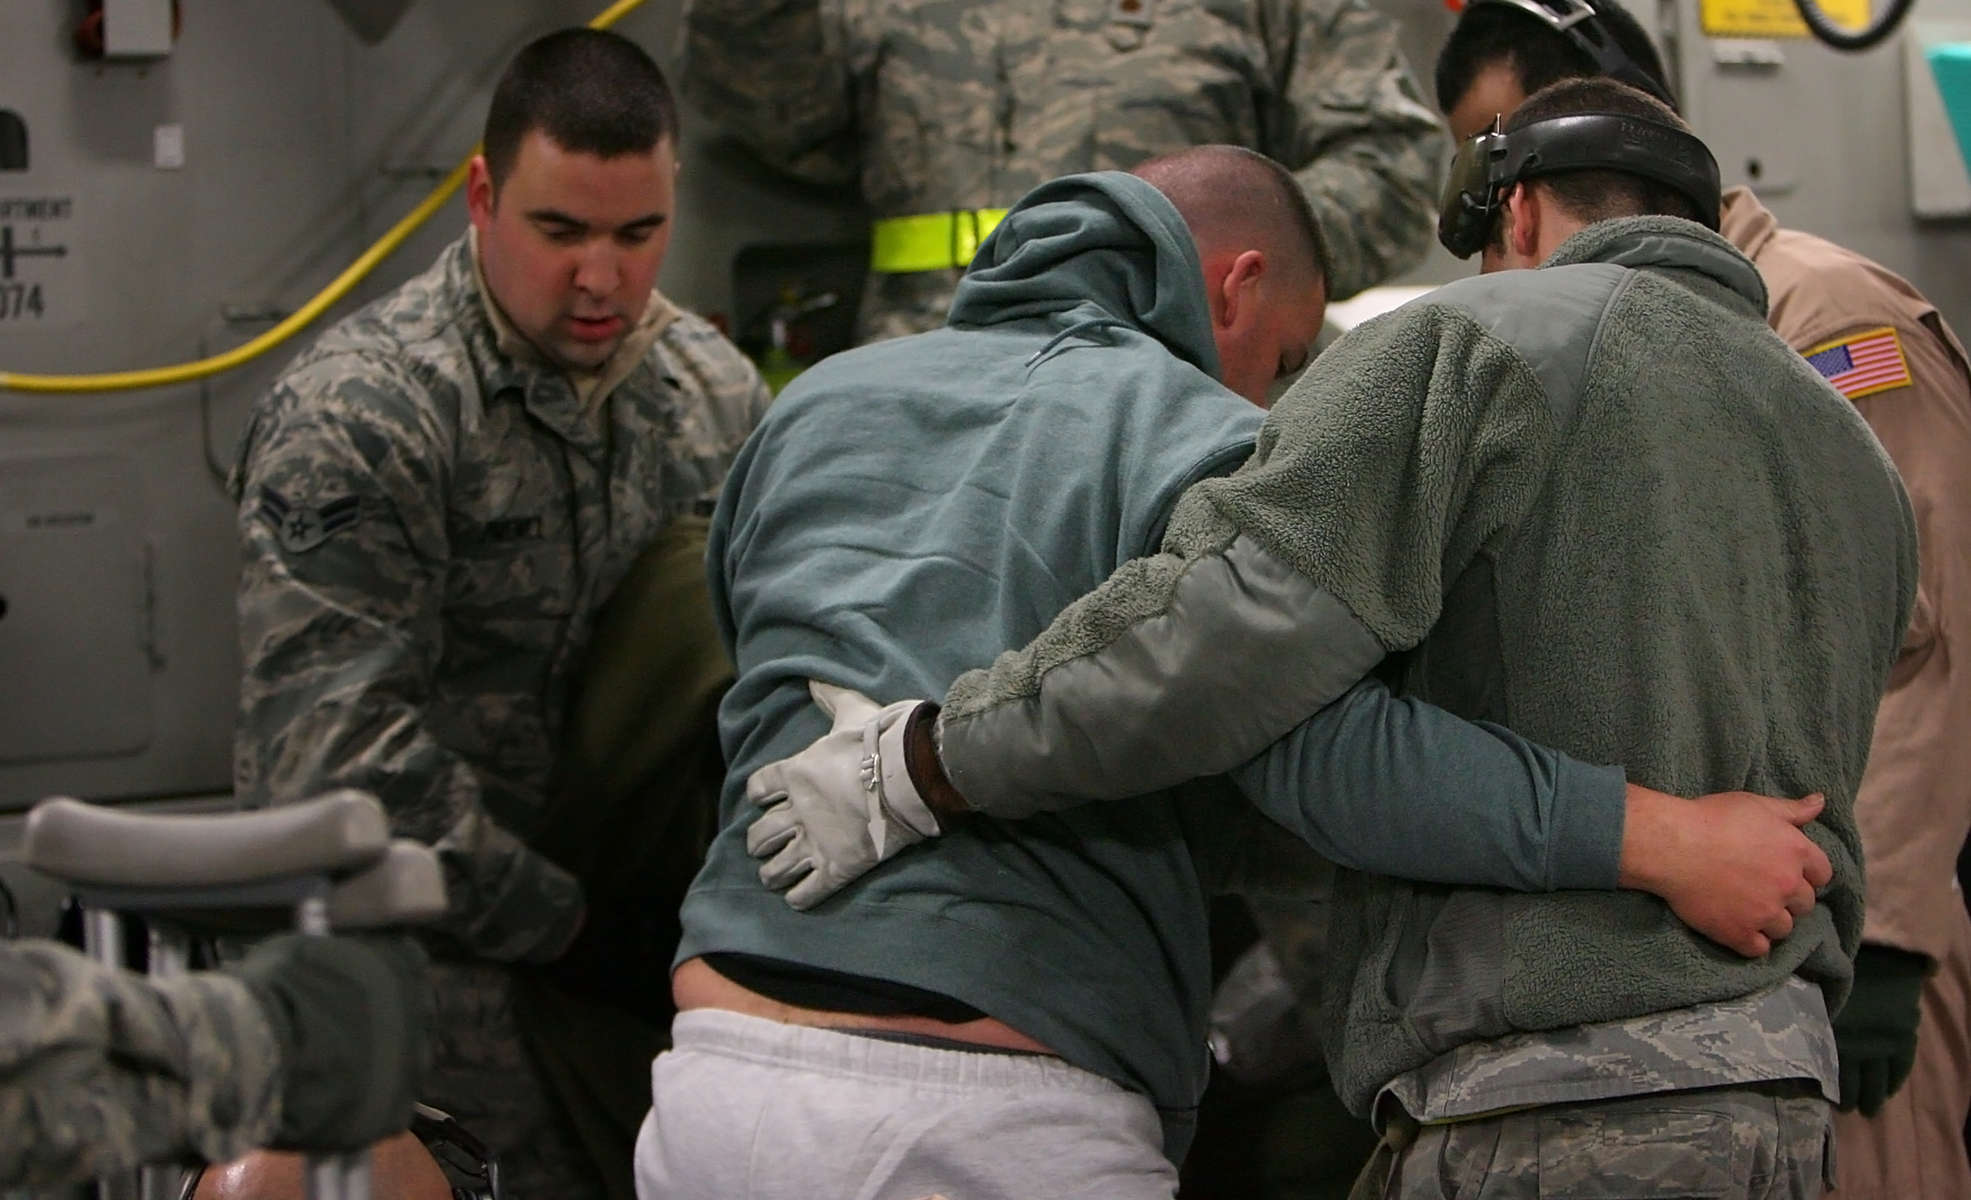 Bagram Air Force Base medical technicians help a wounded warrior get onto a stretcher inside a March Air Reserve Base Globemaster C-17 aircraft at BagramAir Force Base in Afghanistan. The cargo area is transformed into an air hospital for the mission.(The Press-Enterprise/ Mark Zaleski)